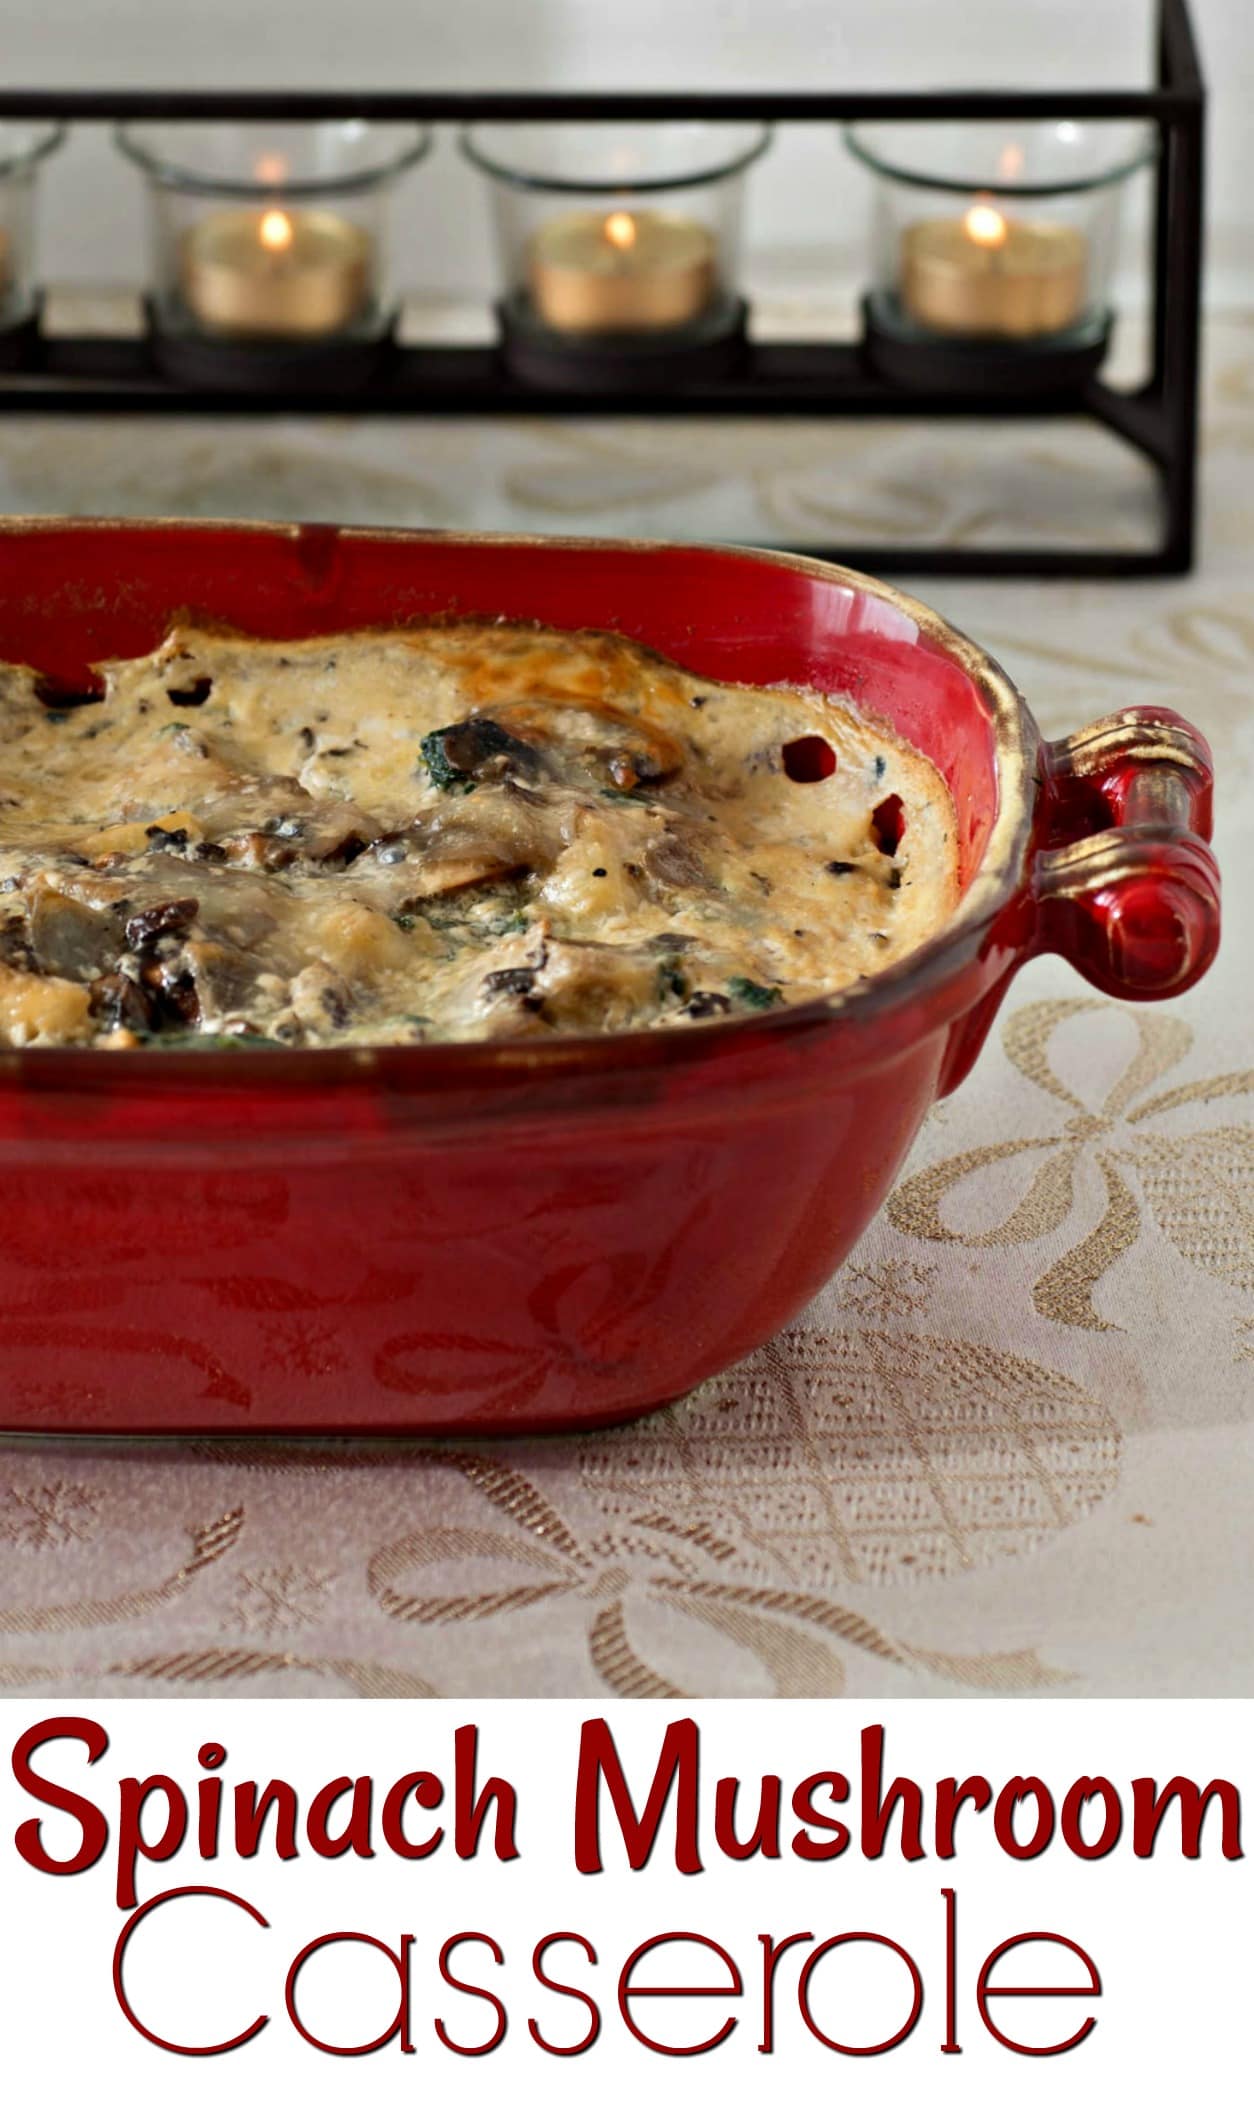 A dish of spinach mushroom casserole on a table.